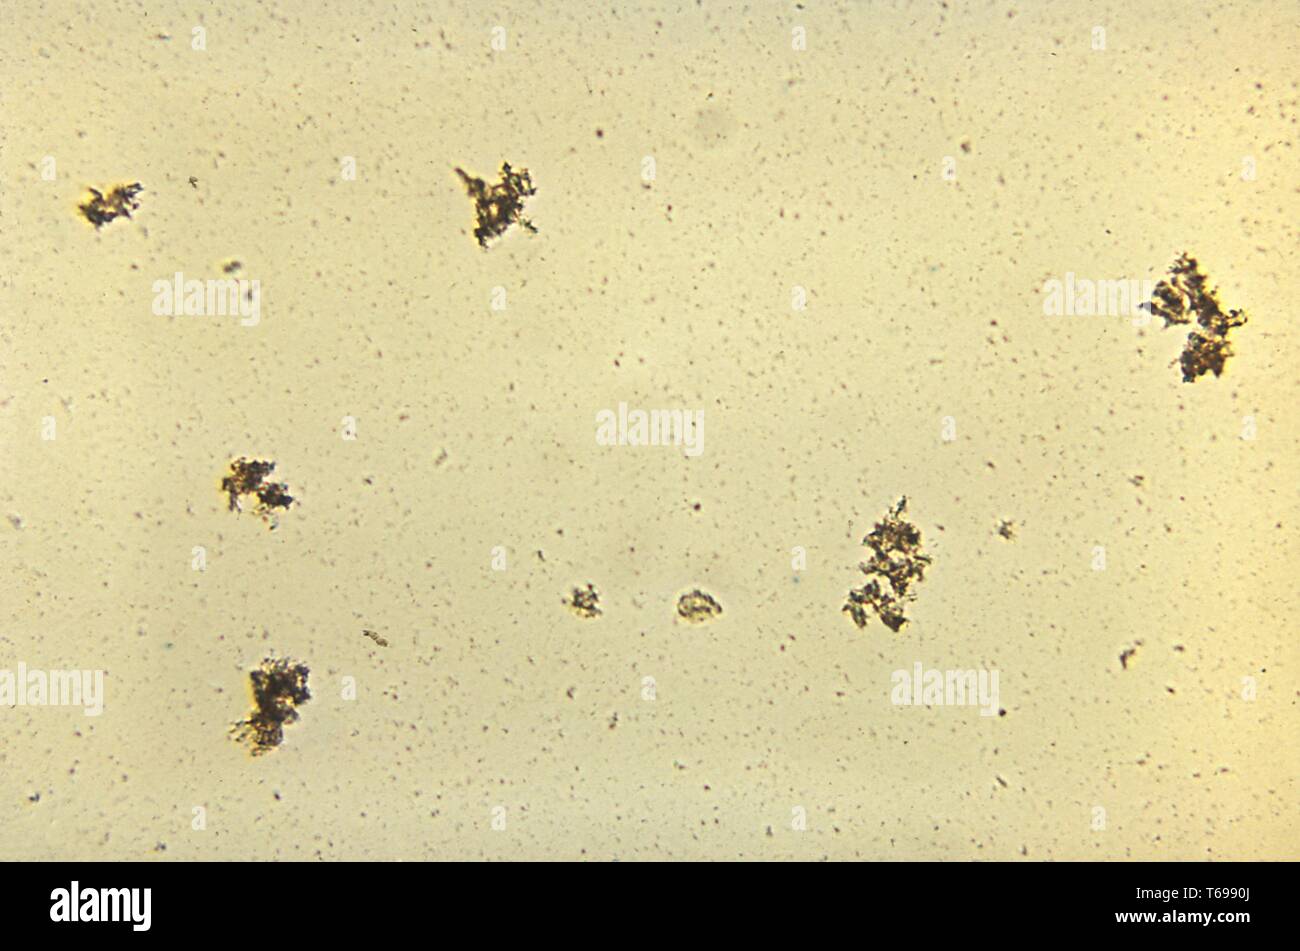 Unstained photomicrograph of the Venereal Disease Research Laboratory (VDRL) slide test for Syphilis, sexually transmitted disease caused by the bacterium Treponema pallidum, 1969. Image courtesy Centers for Disease Control and Prevention (CDC) / Renelle Woodall. () Stock Photo